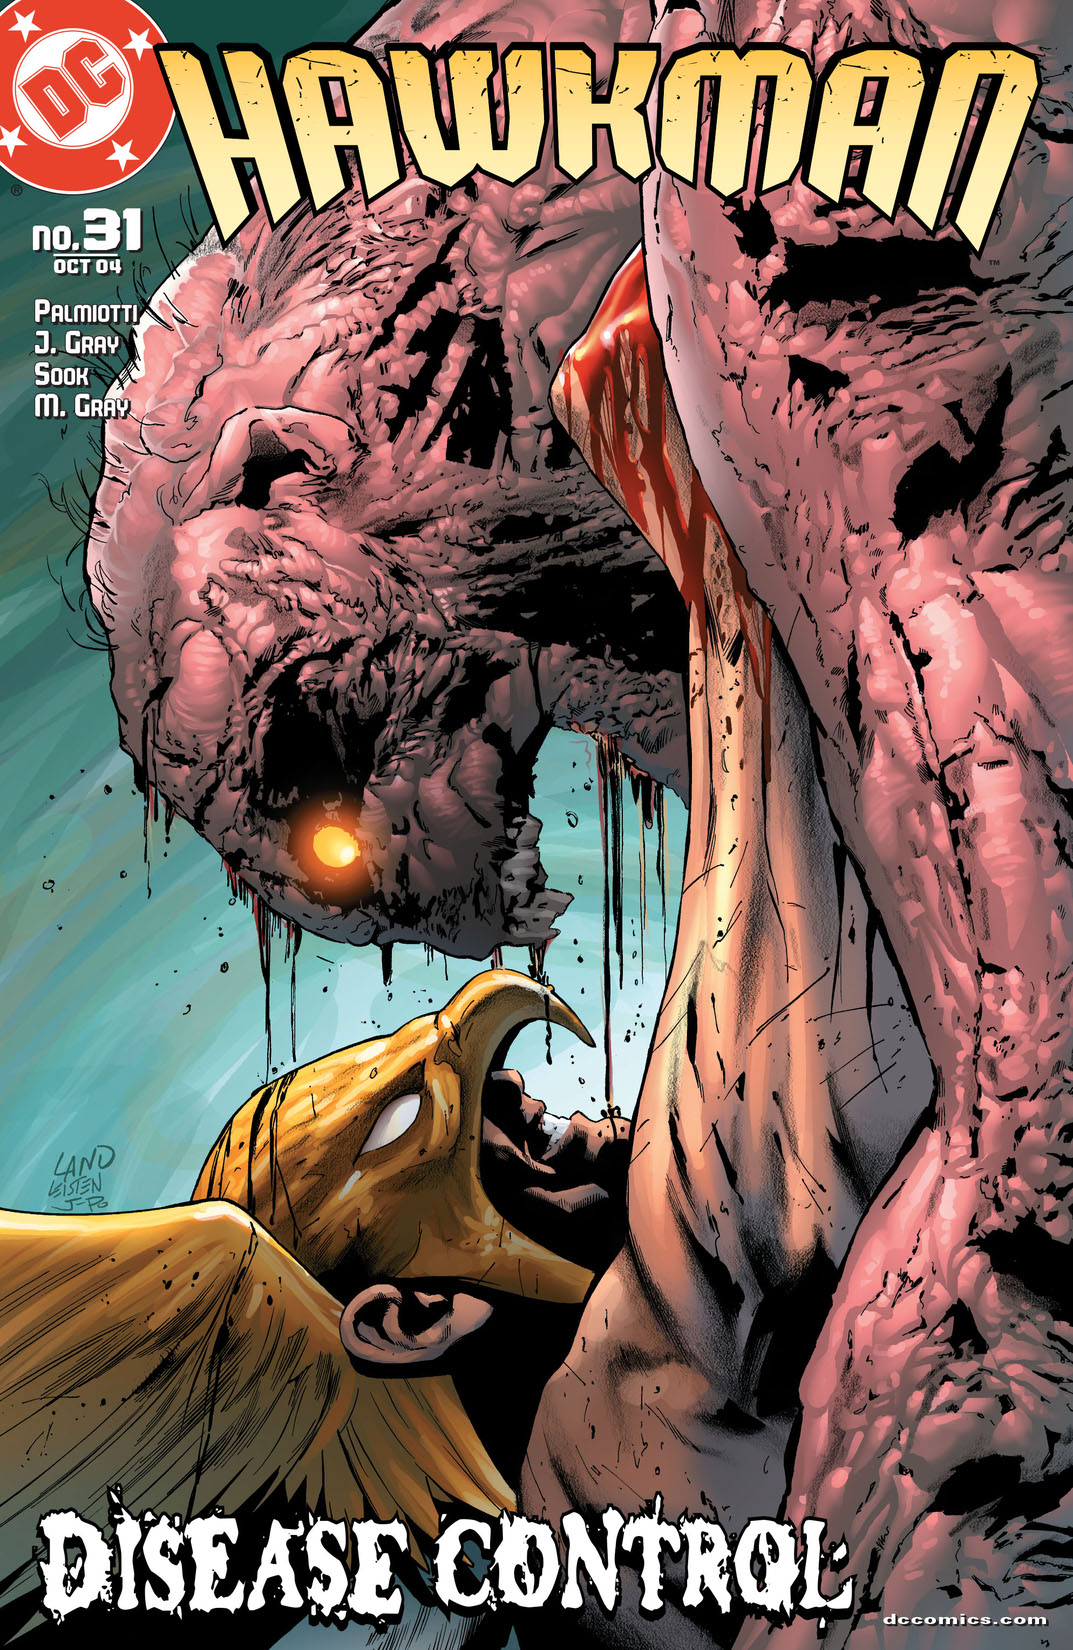 Hawkman (2002-) #31 preview images